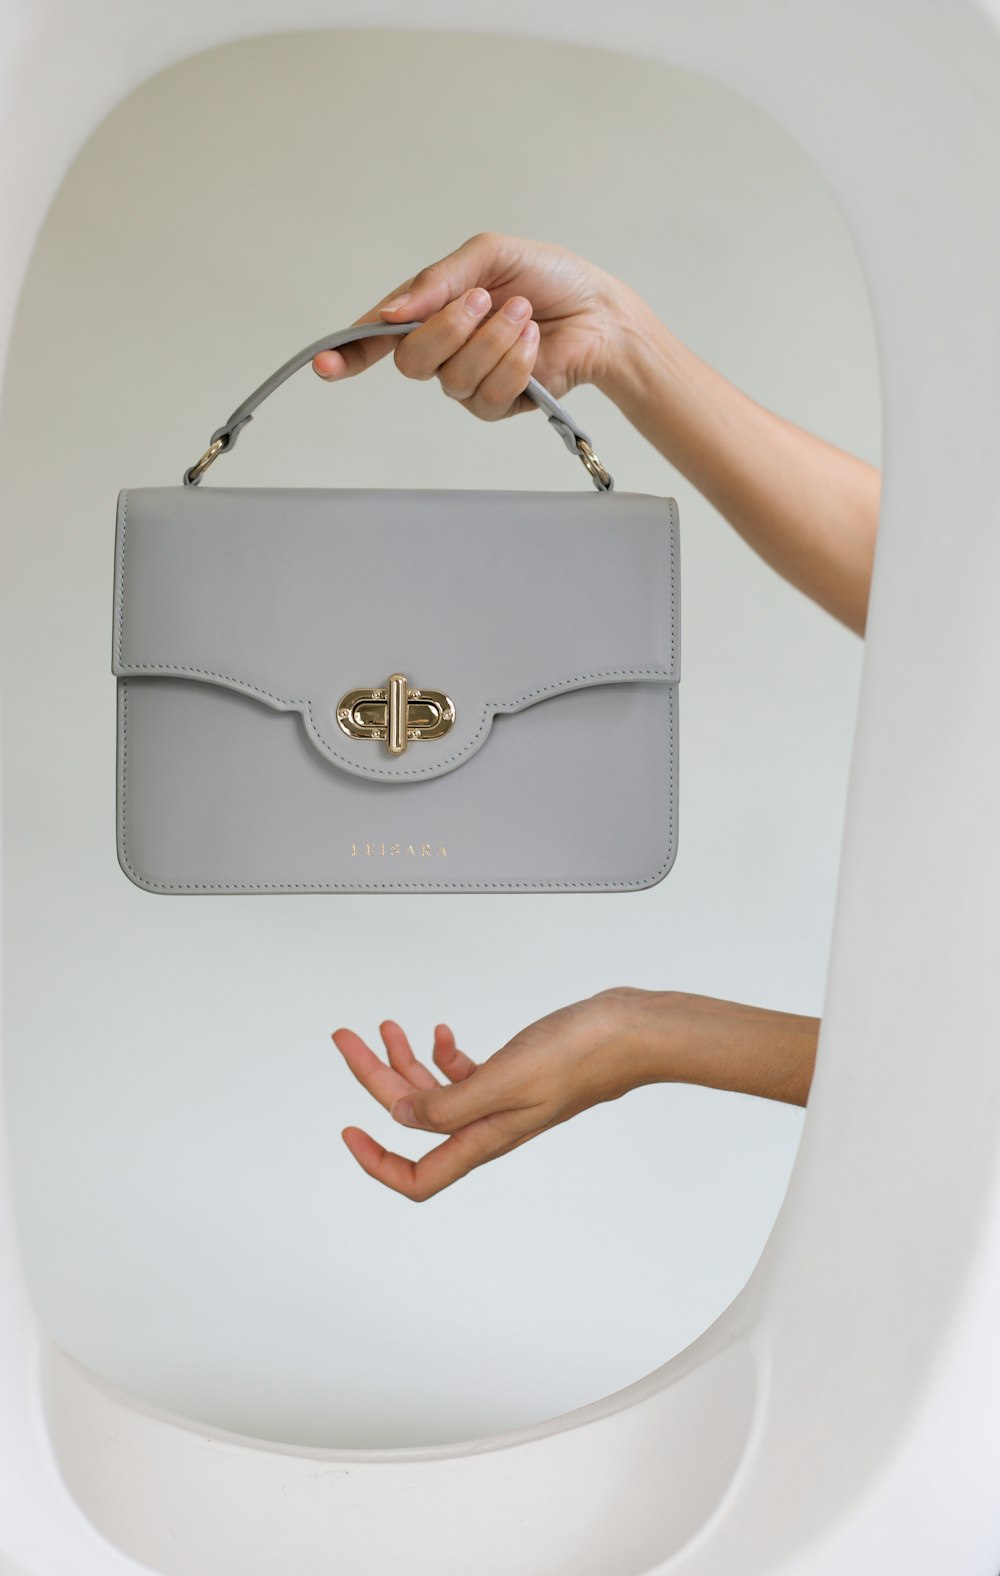 a woman's hand holding a gray purse